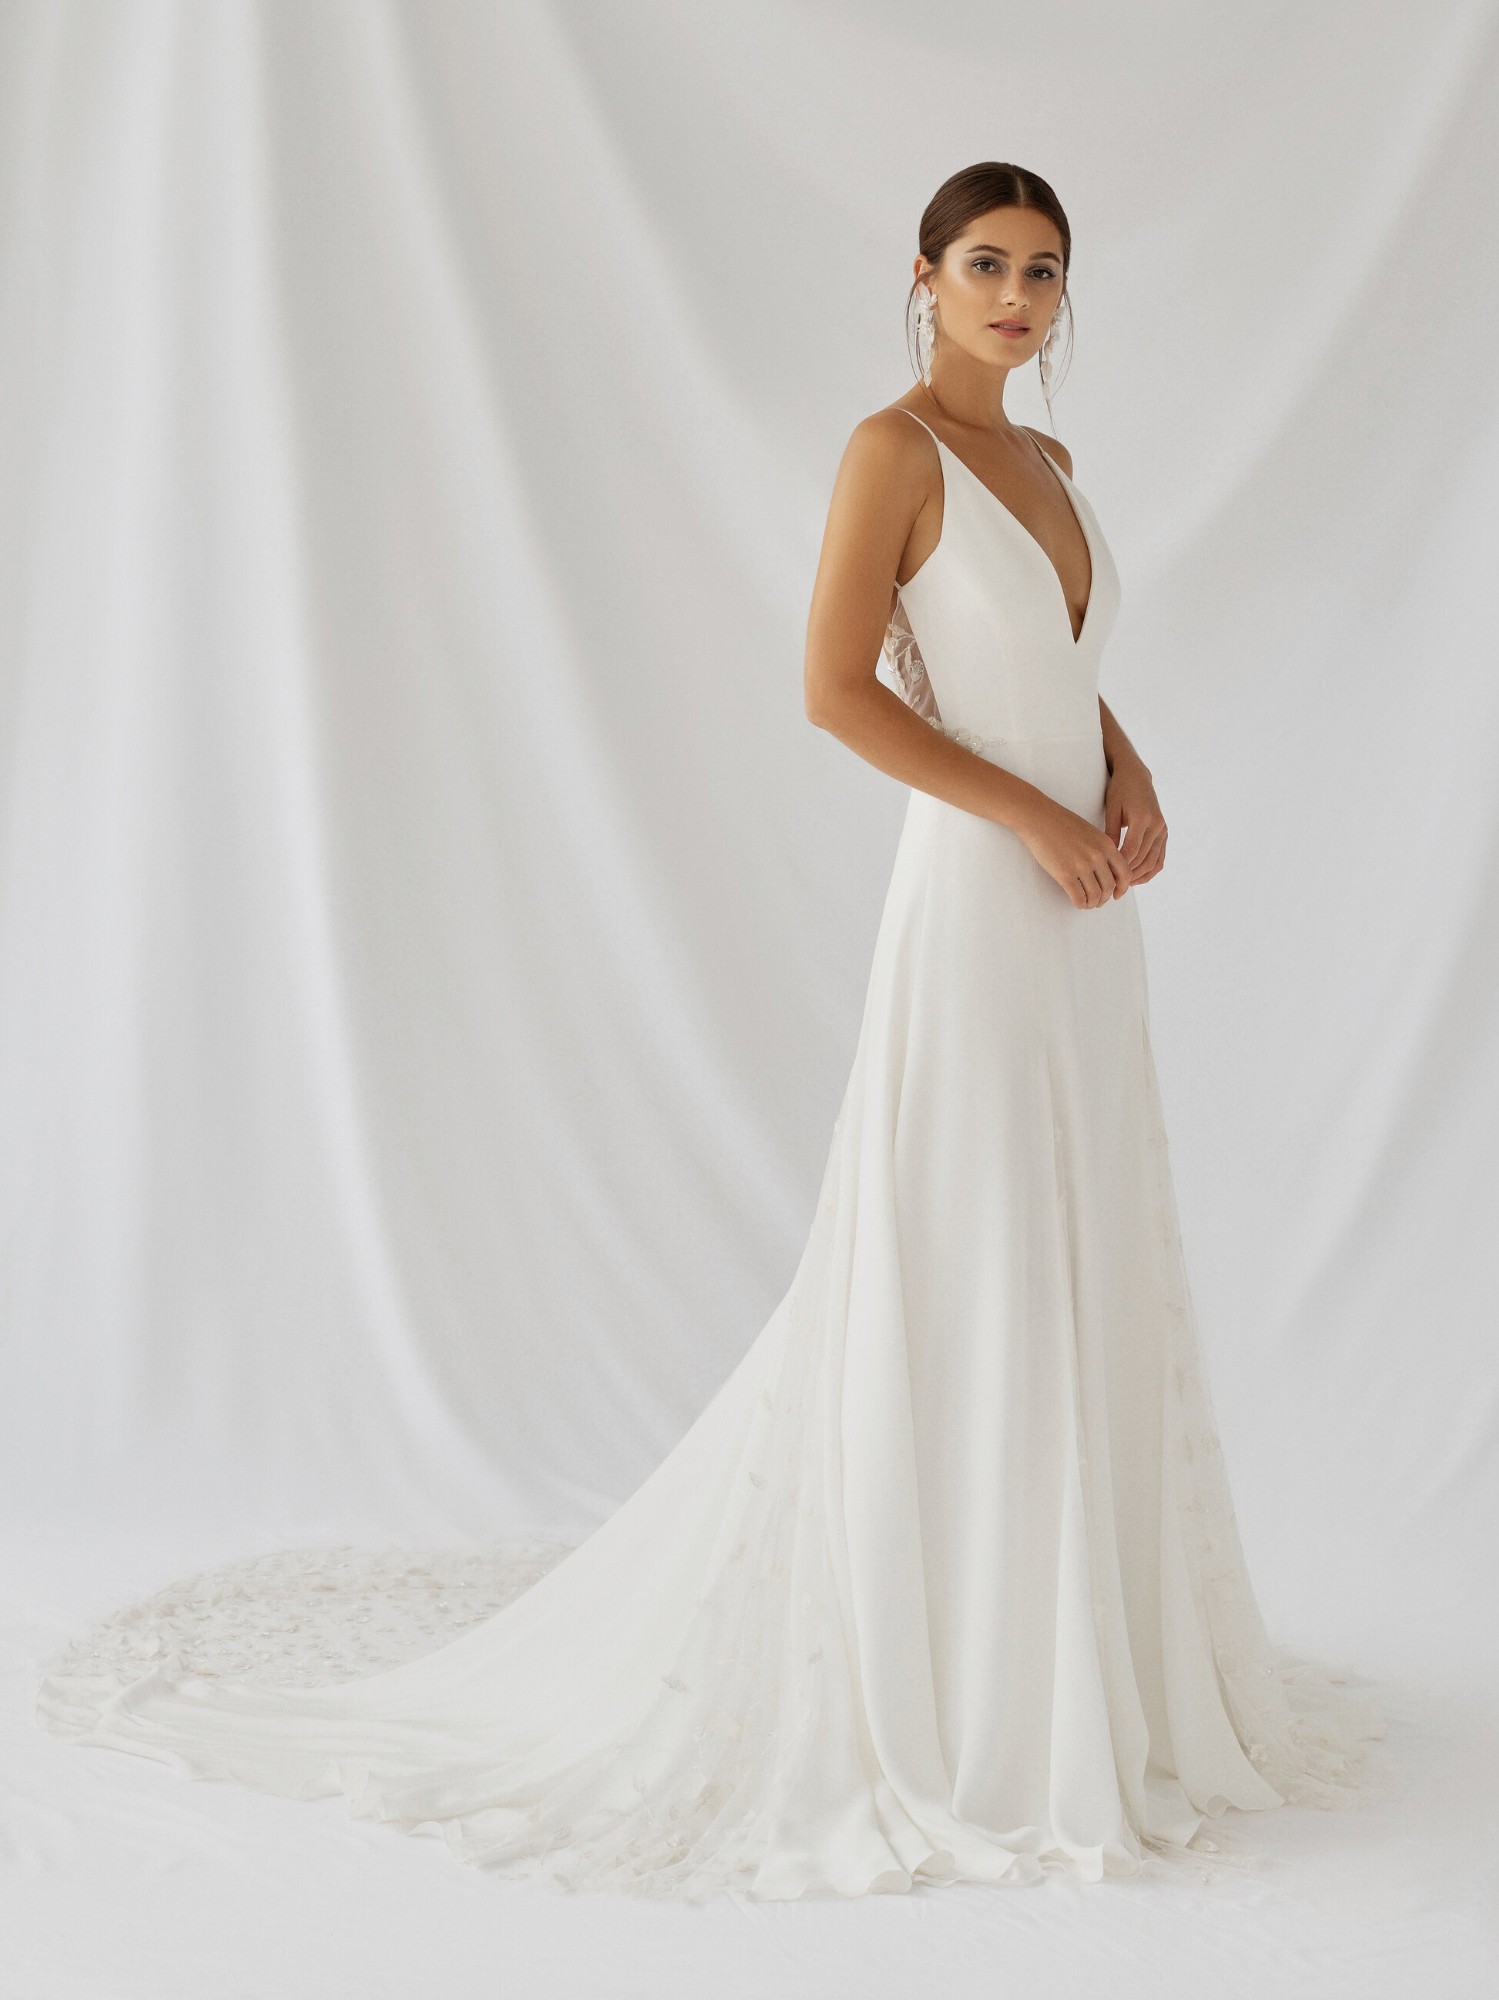 Fiorella Gown Inspirated By Botanica of Alexandra Grecco 2021 Bridal Collection